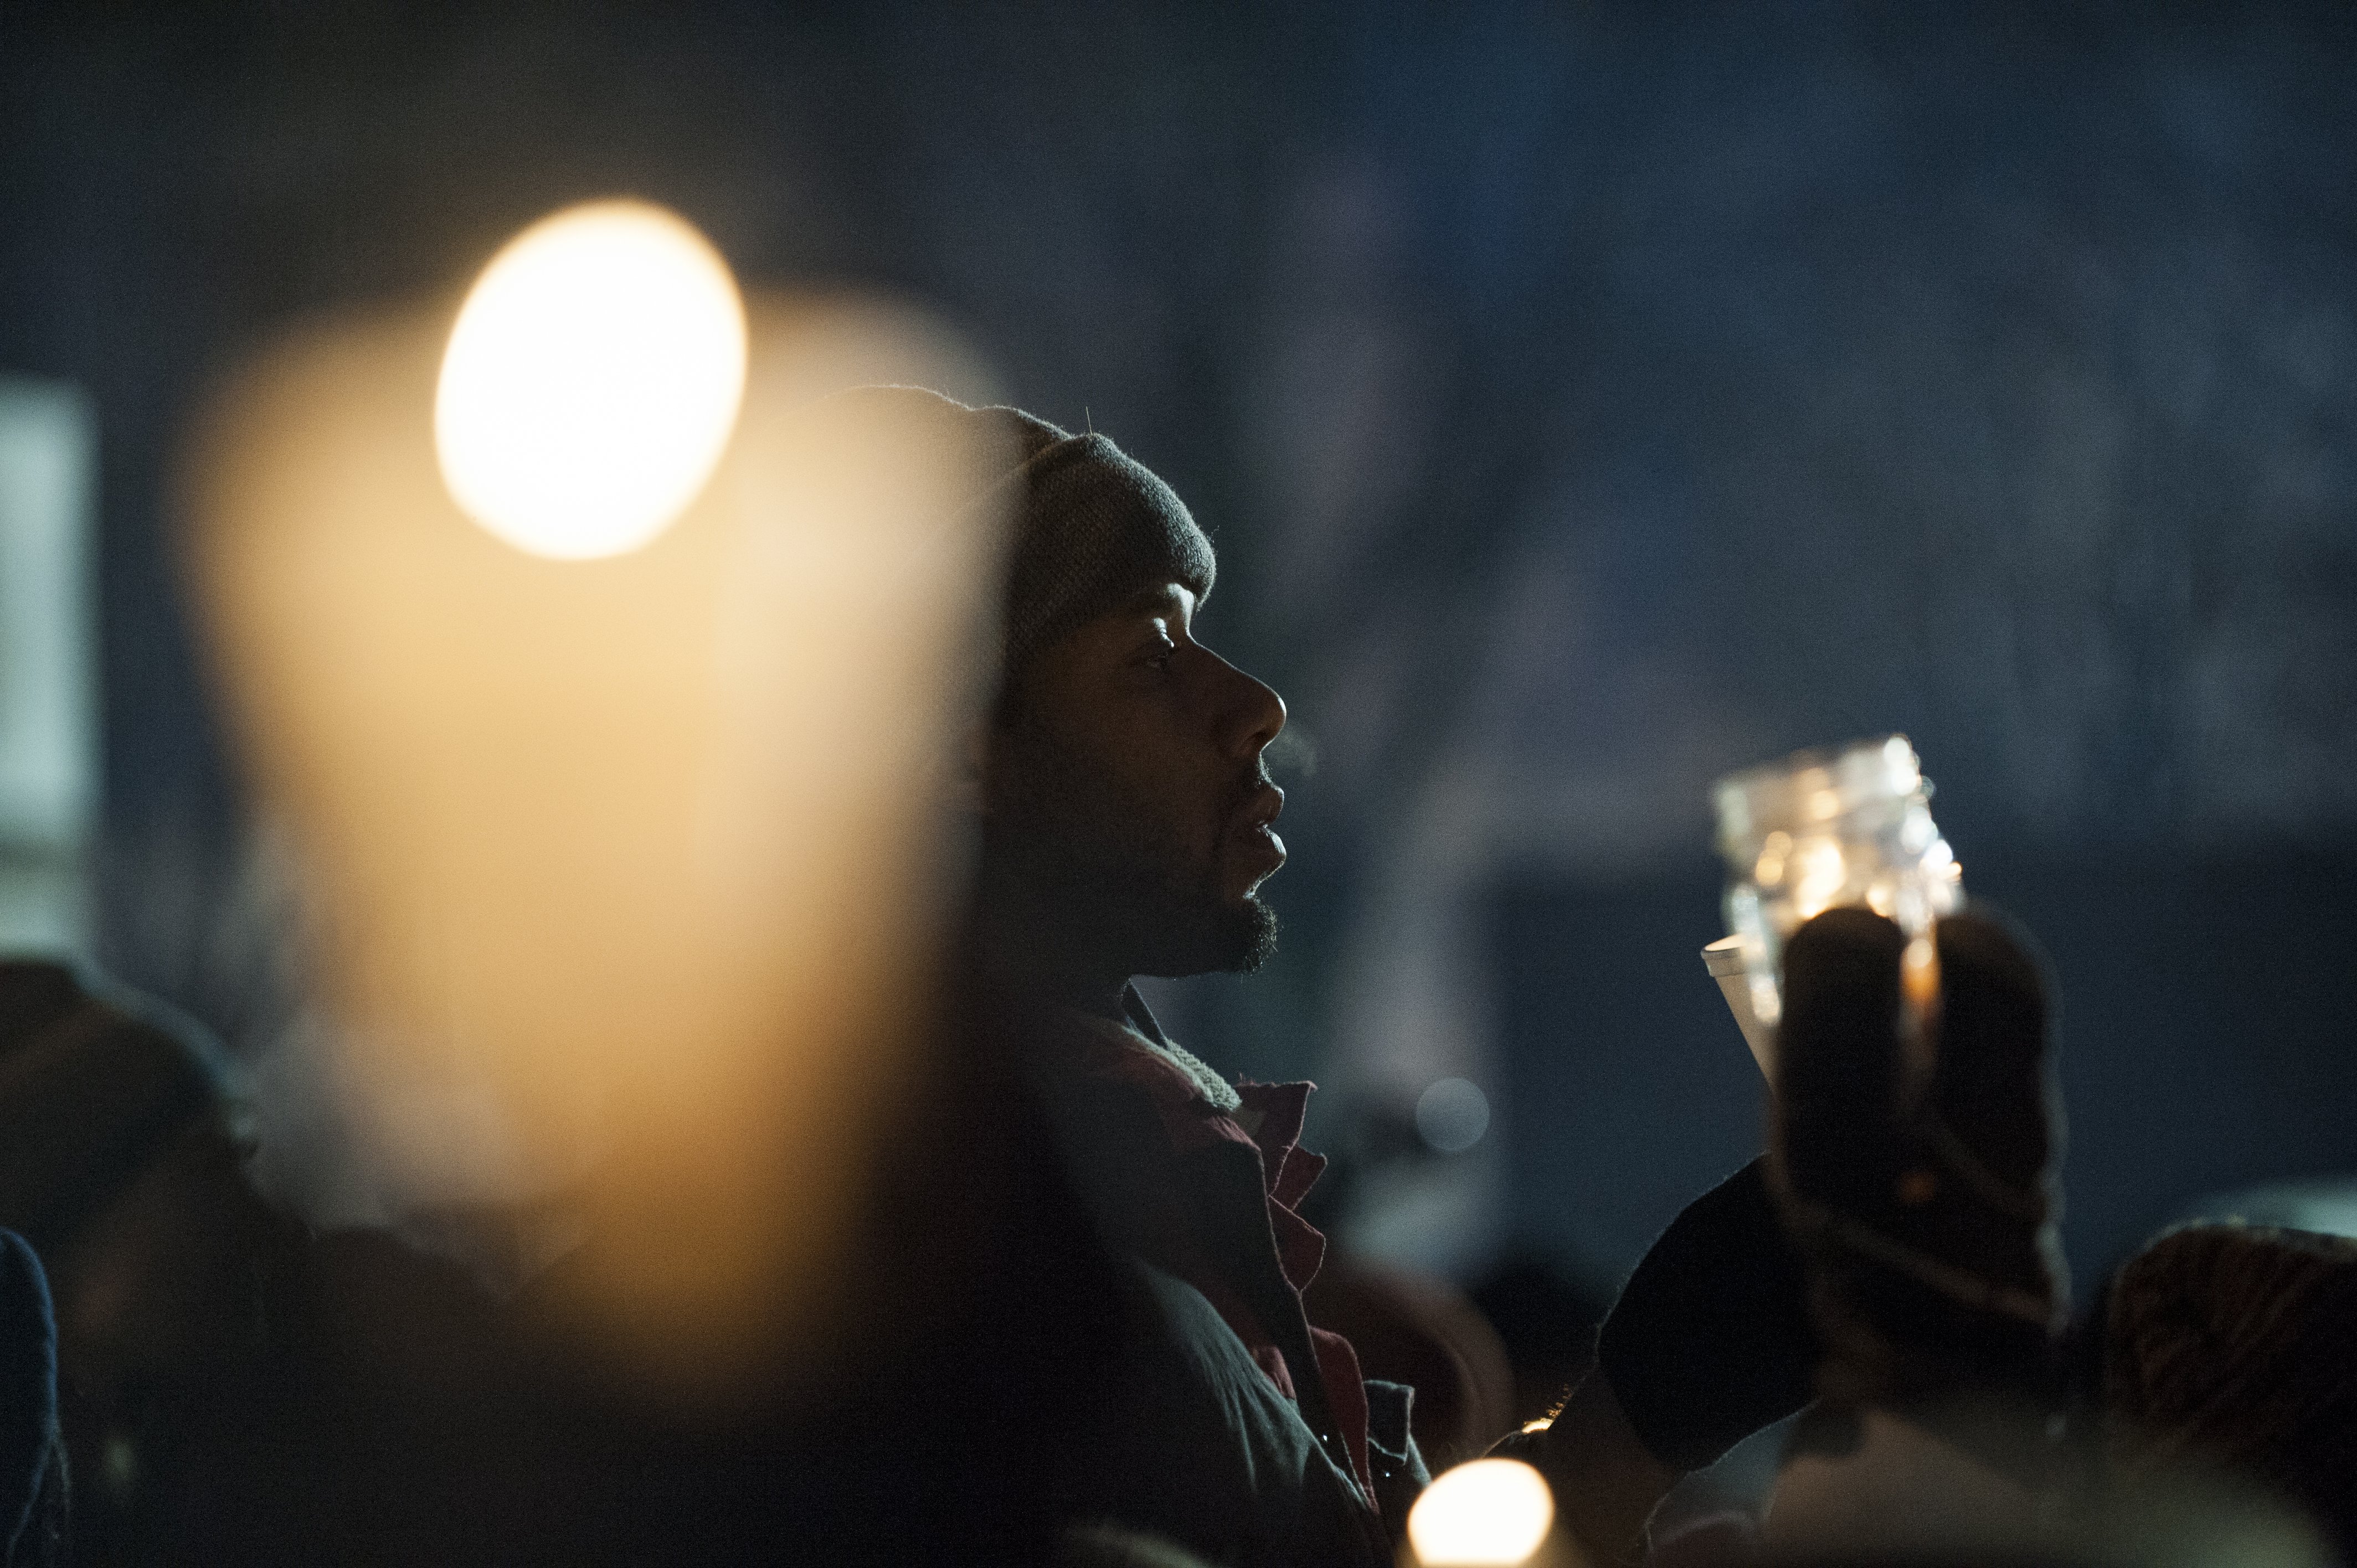 Protestors, activists, and community members listen to speeches at a candlelight vigil held for Jamar Clark outside the 4th police precinct  in Minneapolis on Nov. 20, 2015. (Stephen Maturen—Getty Images)